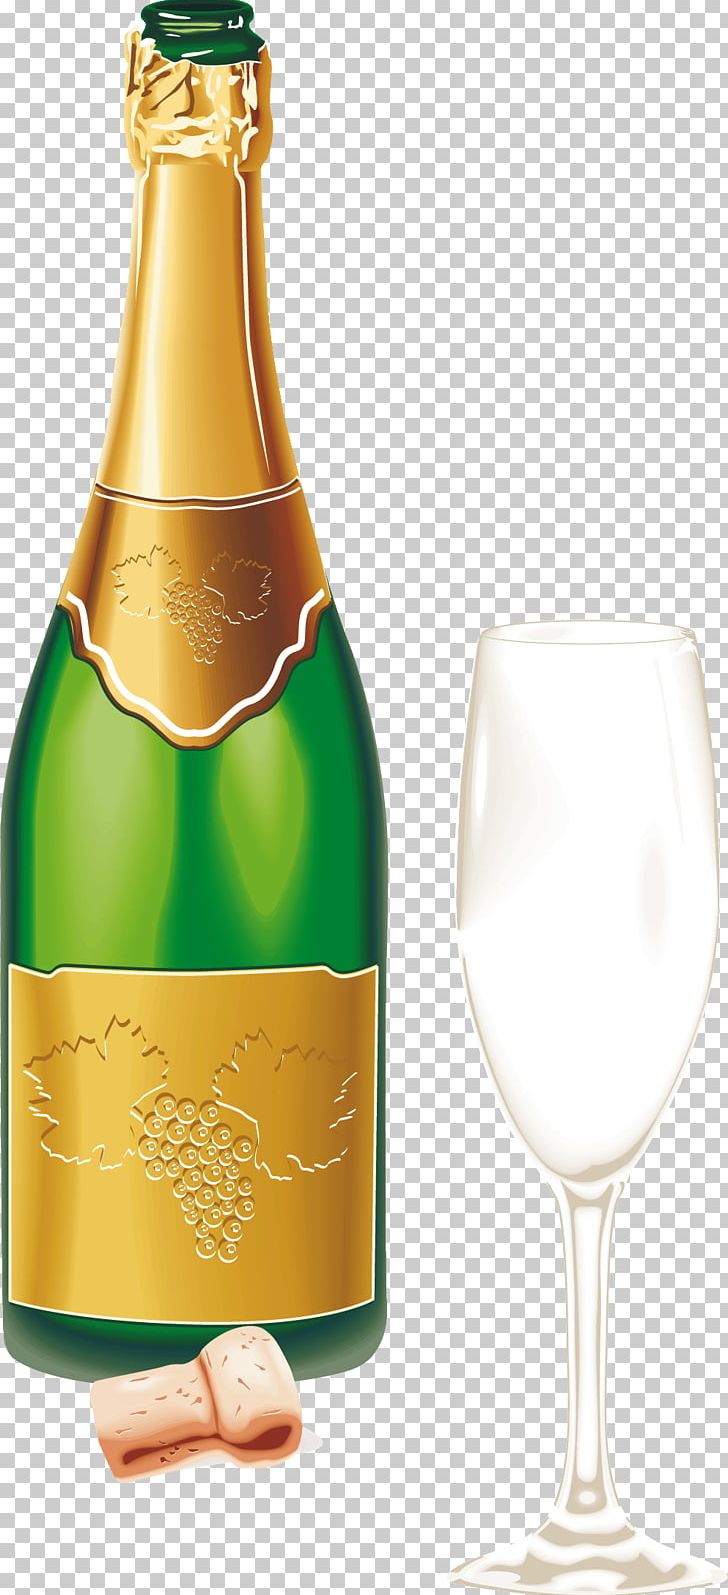 Champagne Glass Wine PNG, Clipart, Alcoholic Beverage, Bottle, Champagne, Champagne Glass, Champagne Png Free PNG Download